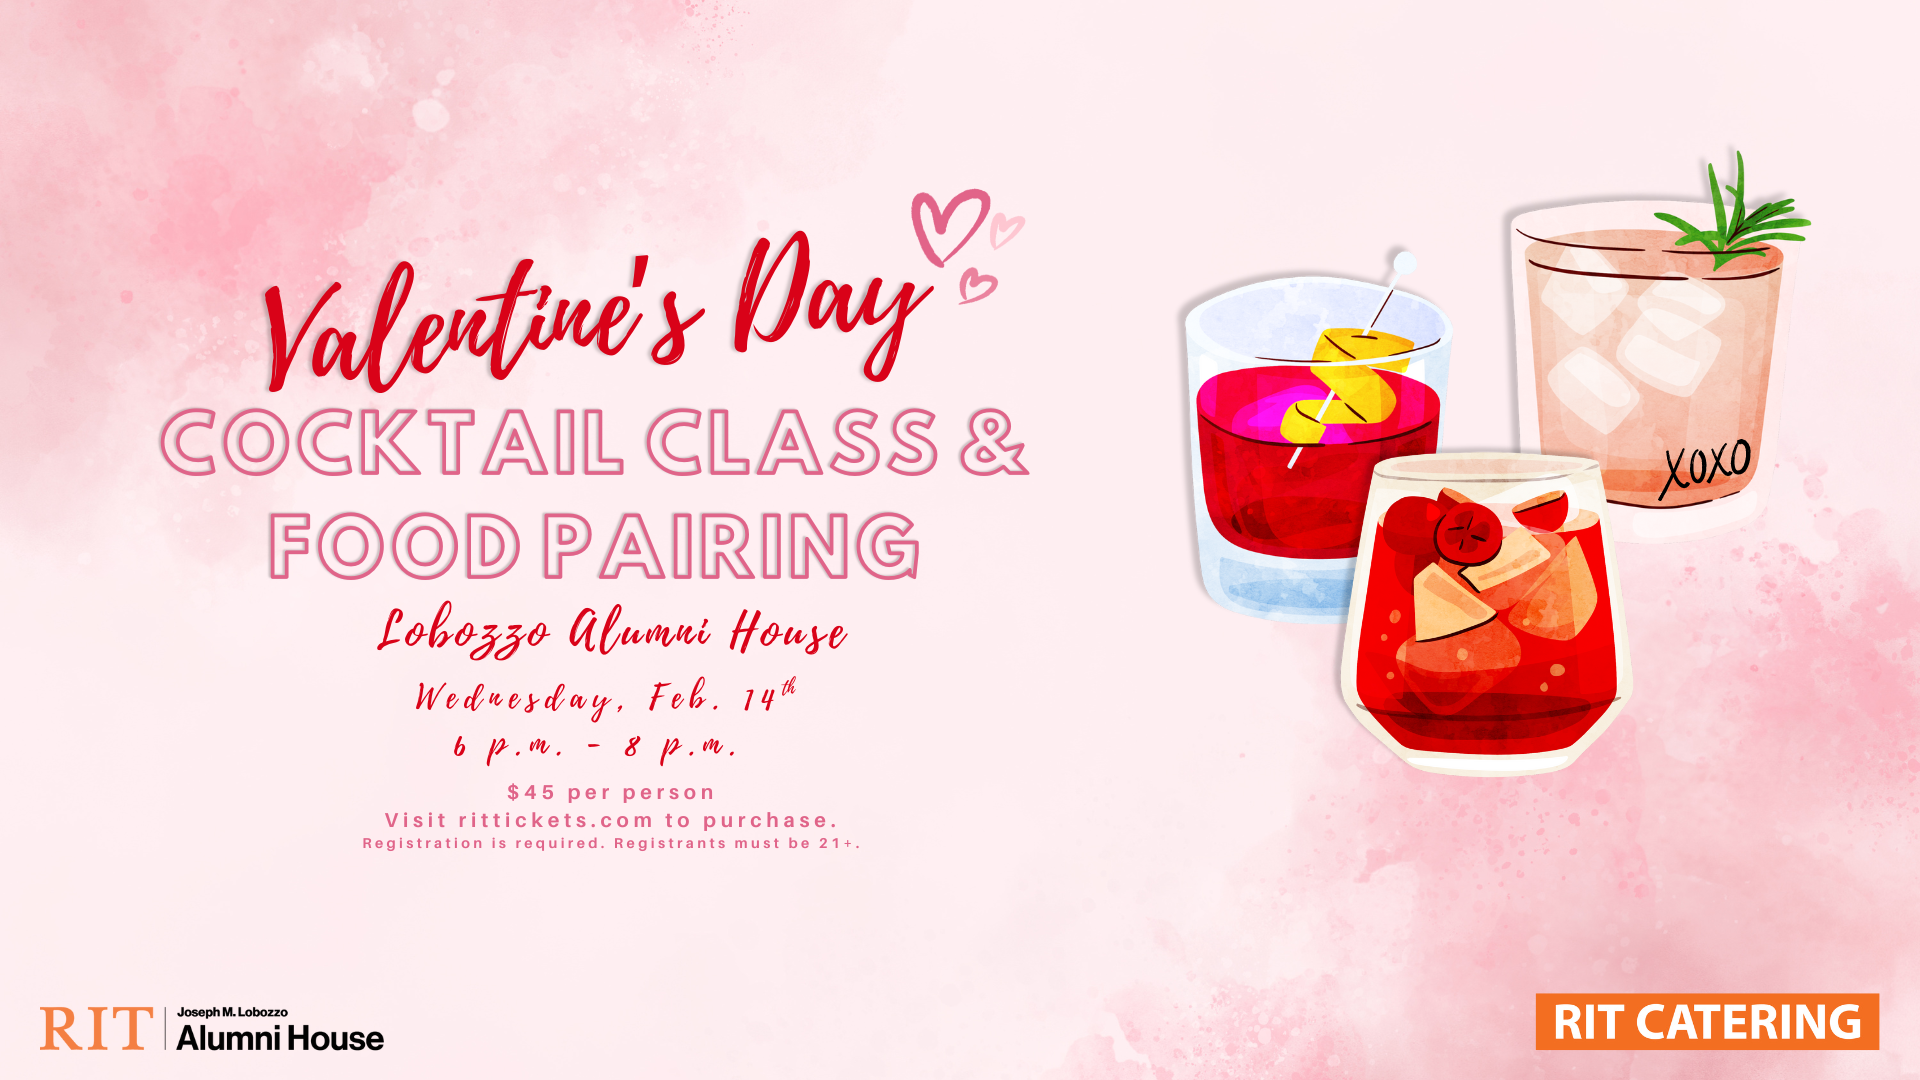 Valentine's Day Cocktail Class and Food Pairing for $45 at the Lobozzo Alumni House. Soft pink watercolor background with cocktail glasses.